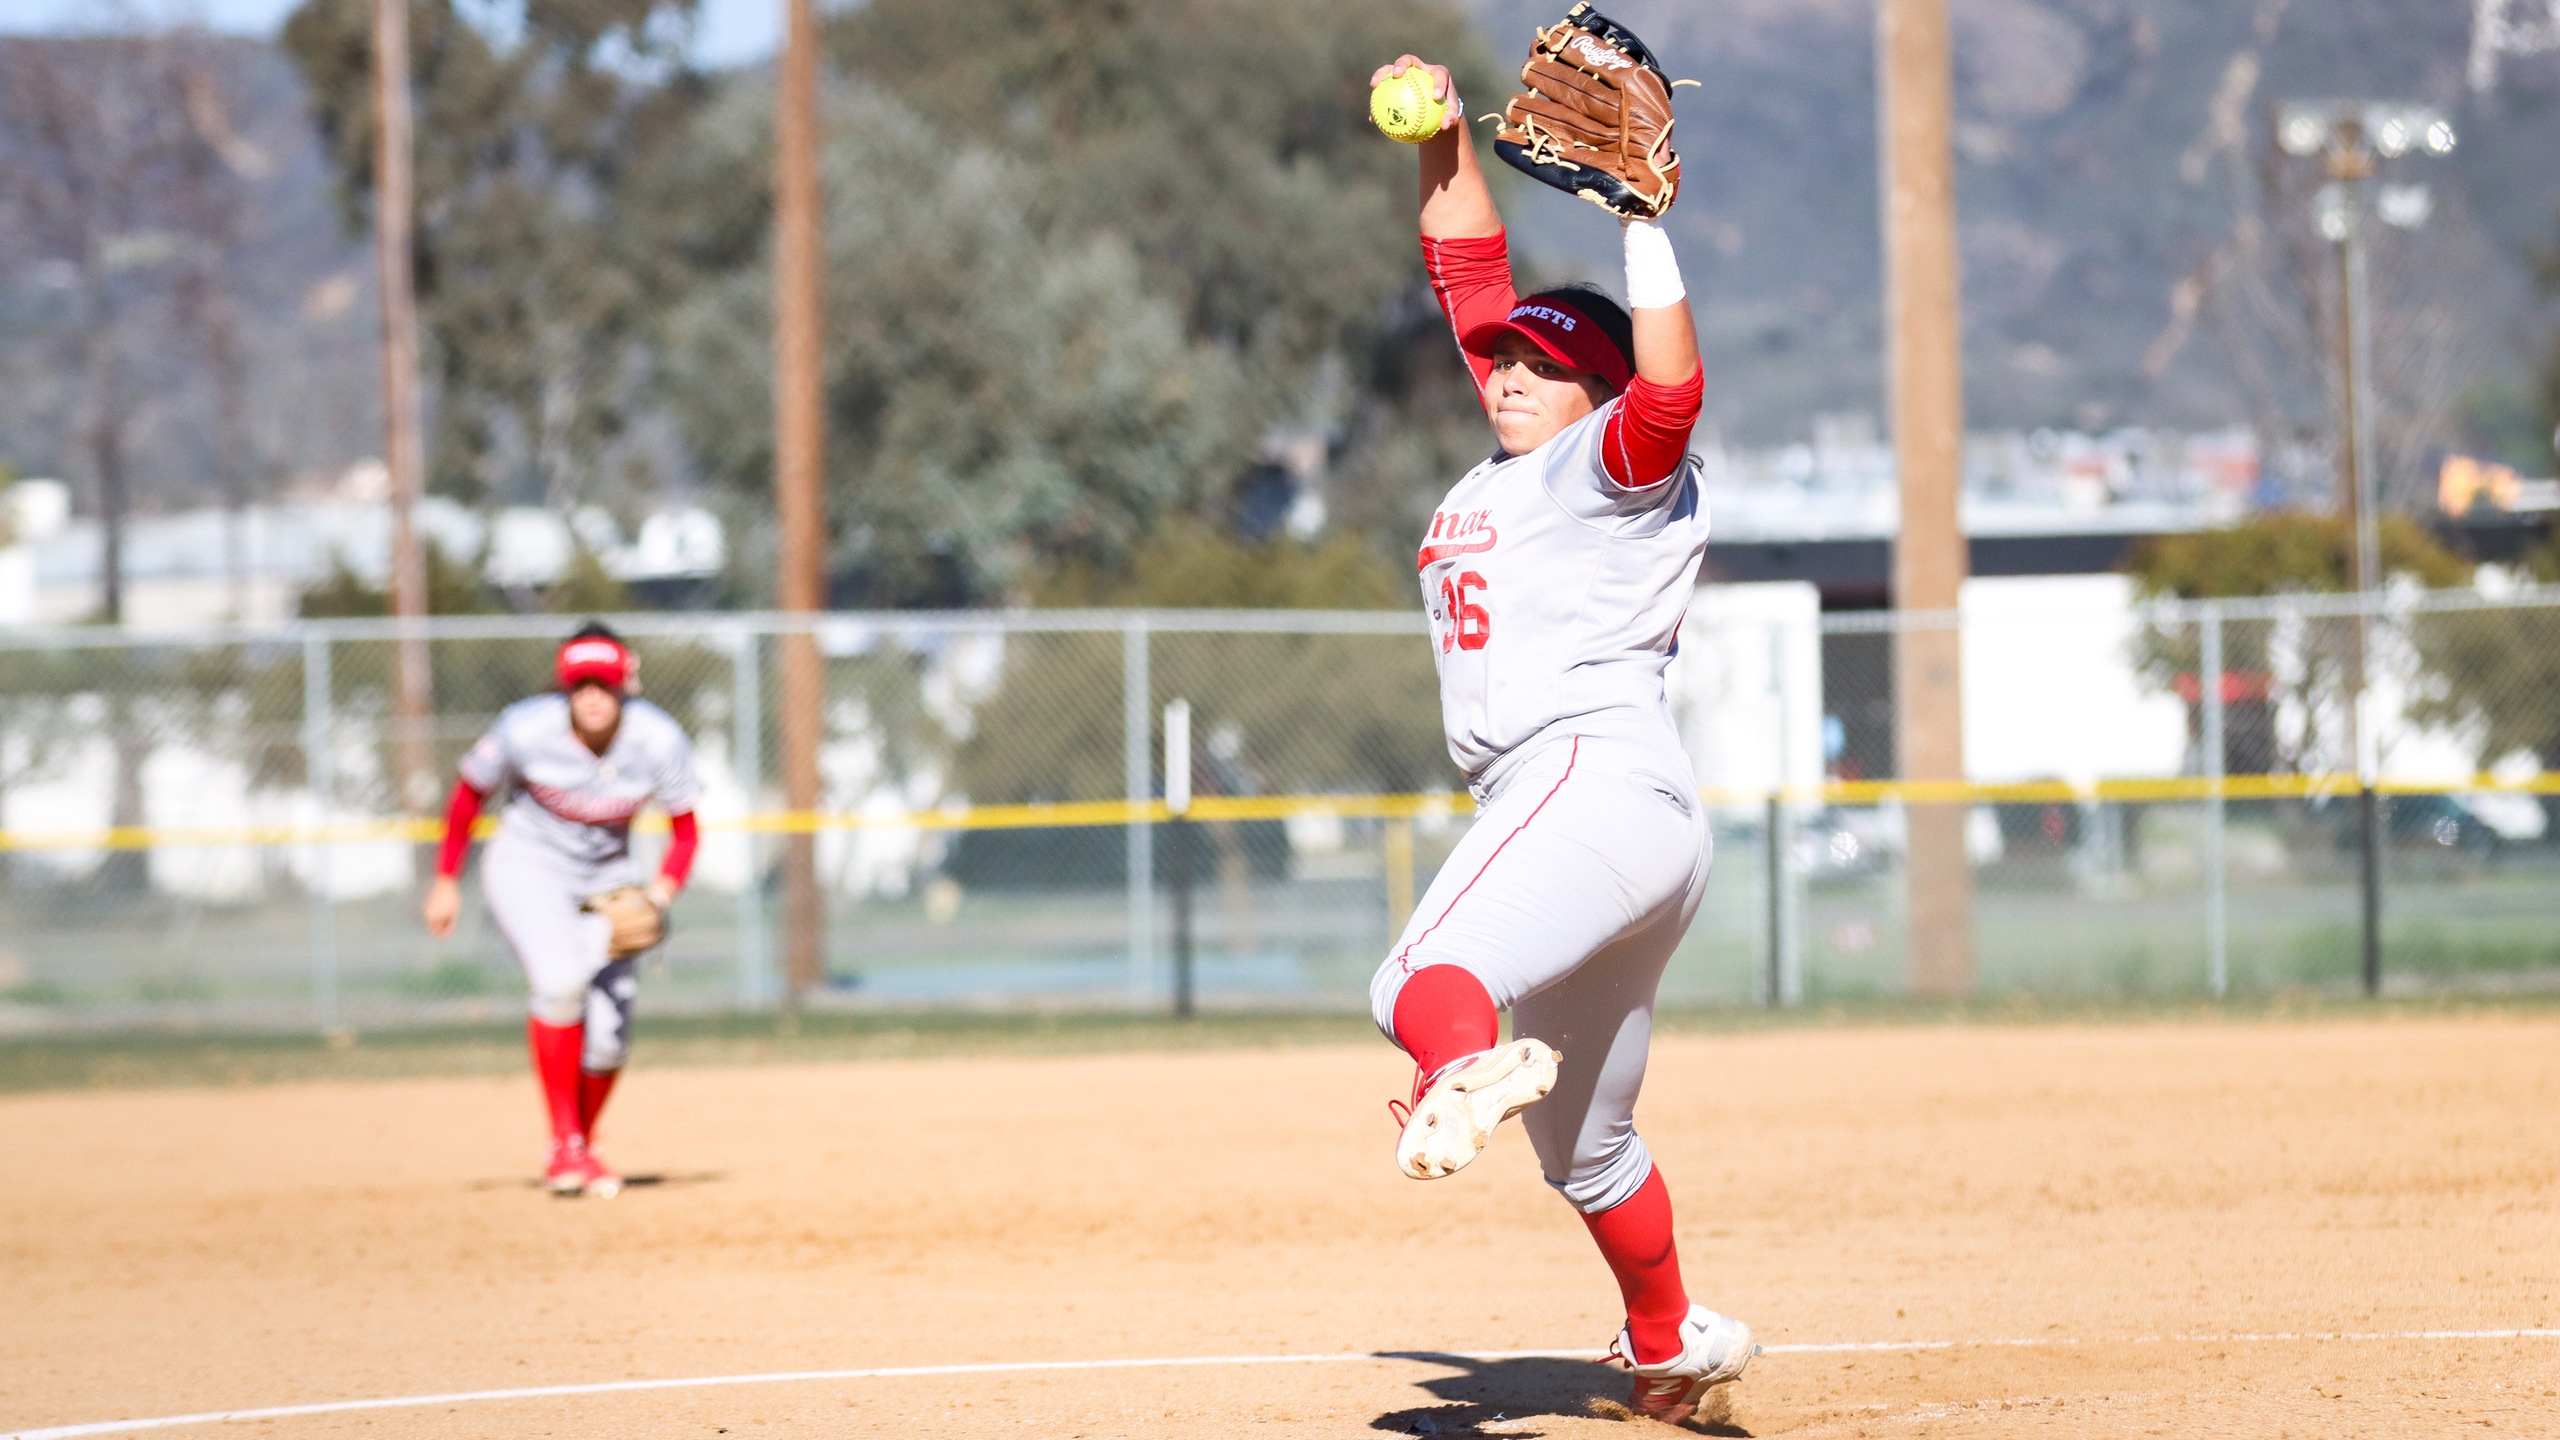 GiGi Clavel had her first no-hitter shutout of the season against Santiago Canyon College. Photo by Cara Heise.